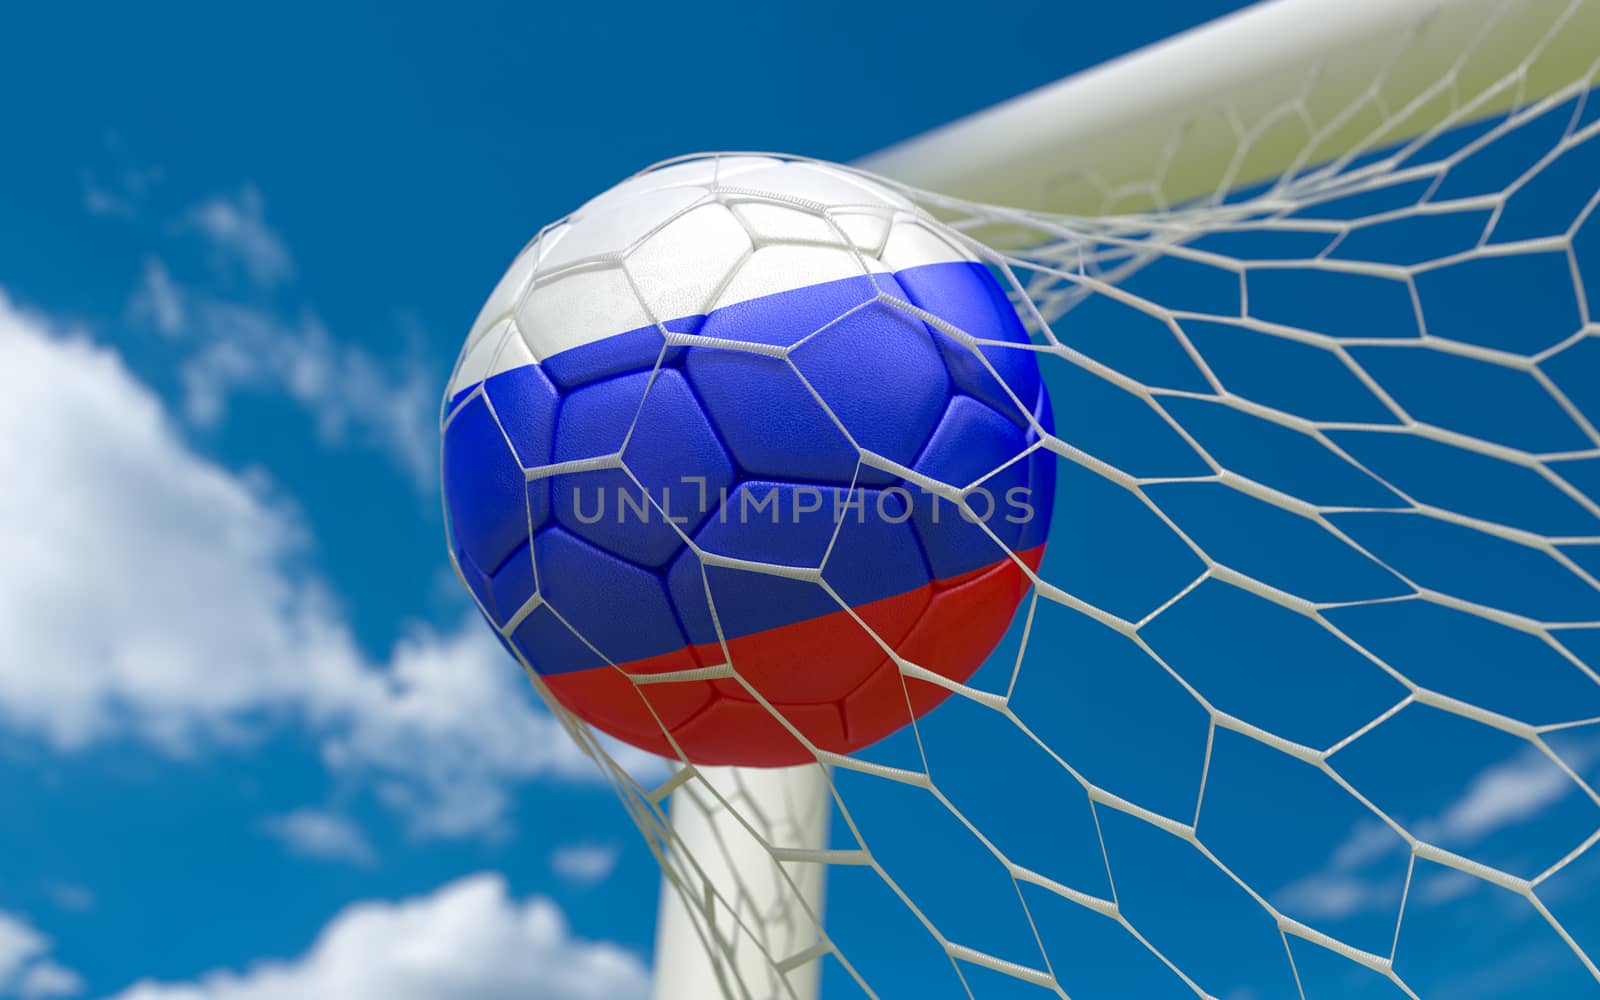 Russia flag and soccer ball in goal net by Barbraford